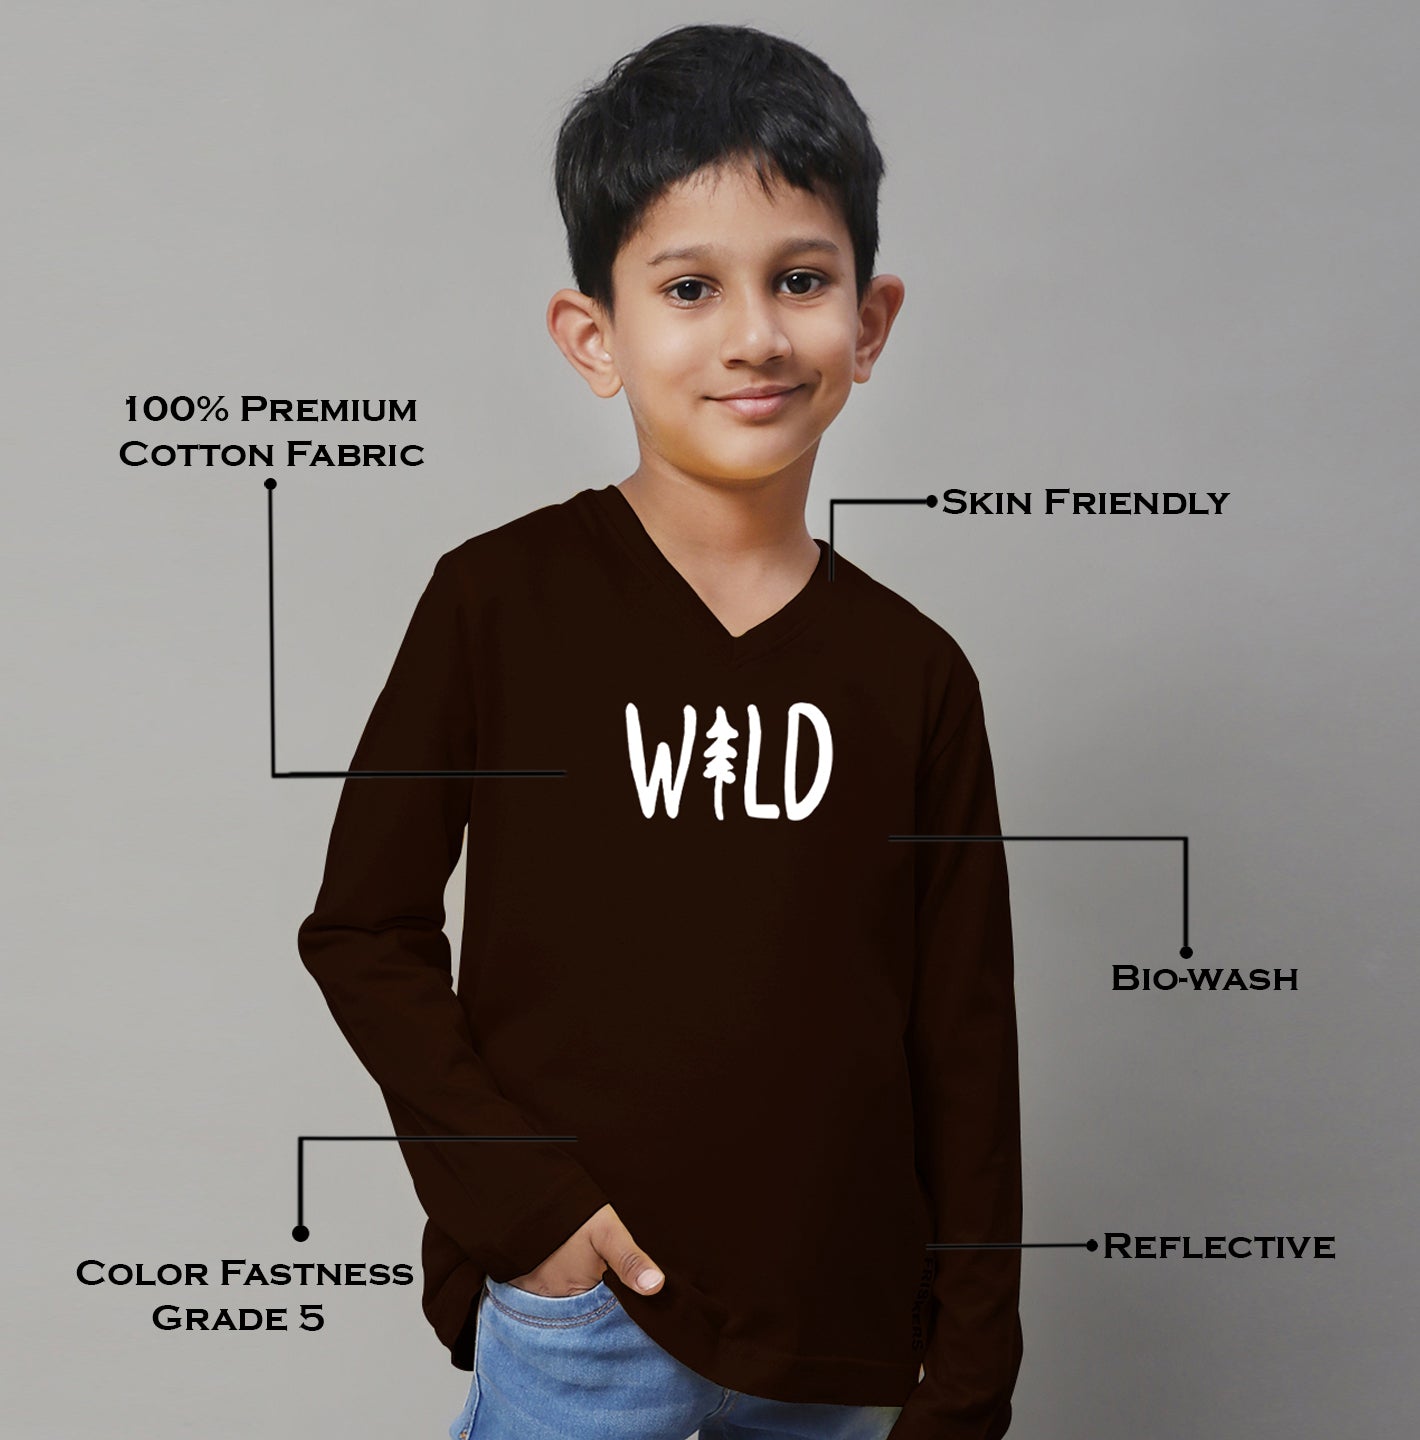 Boys Wild Casual Fit Printed T-Shirt - Friskers